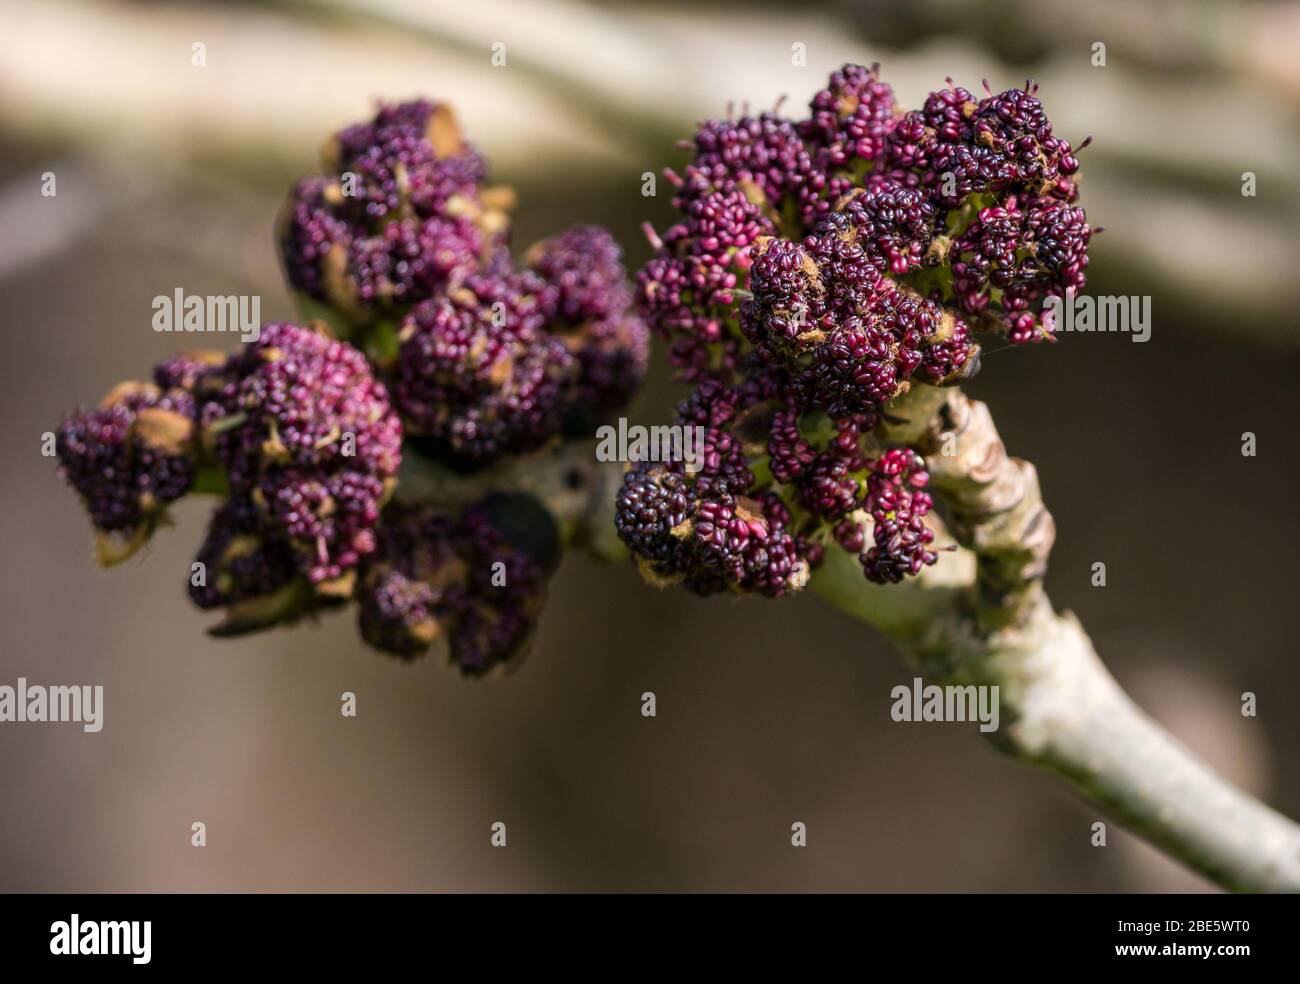 East Lothian, Scotland, United Kingdom. 12th April 2020. UK Weather: Spring wildlife in sunshine. Bright purple buds on a European ash tree (Fraxinus excelsior) Stock Photo